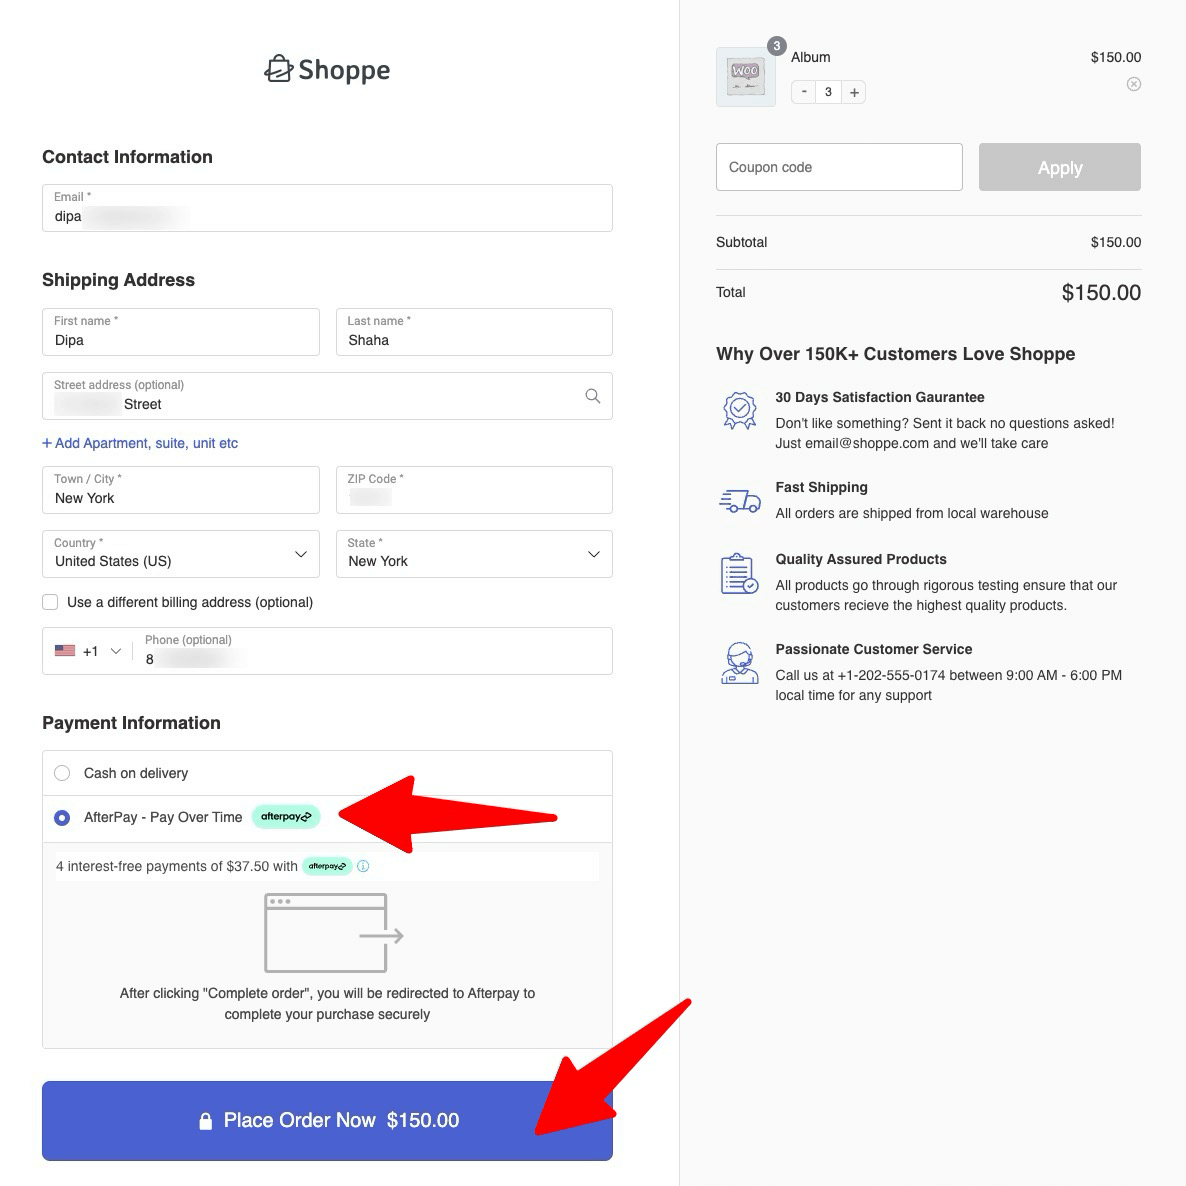 choose afterpay and place order